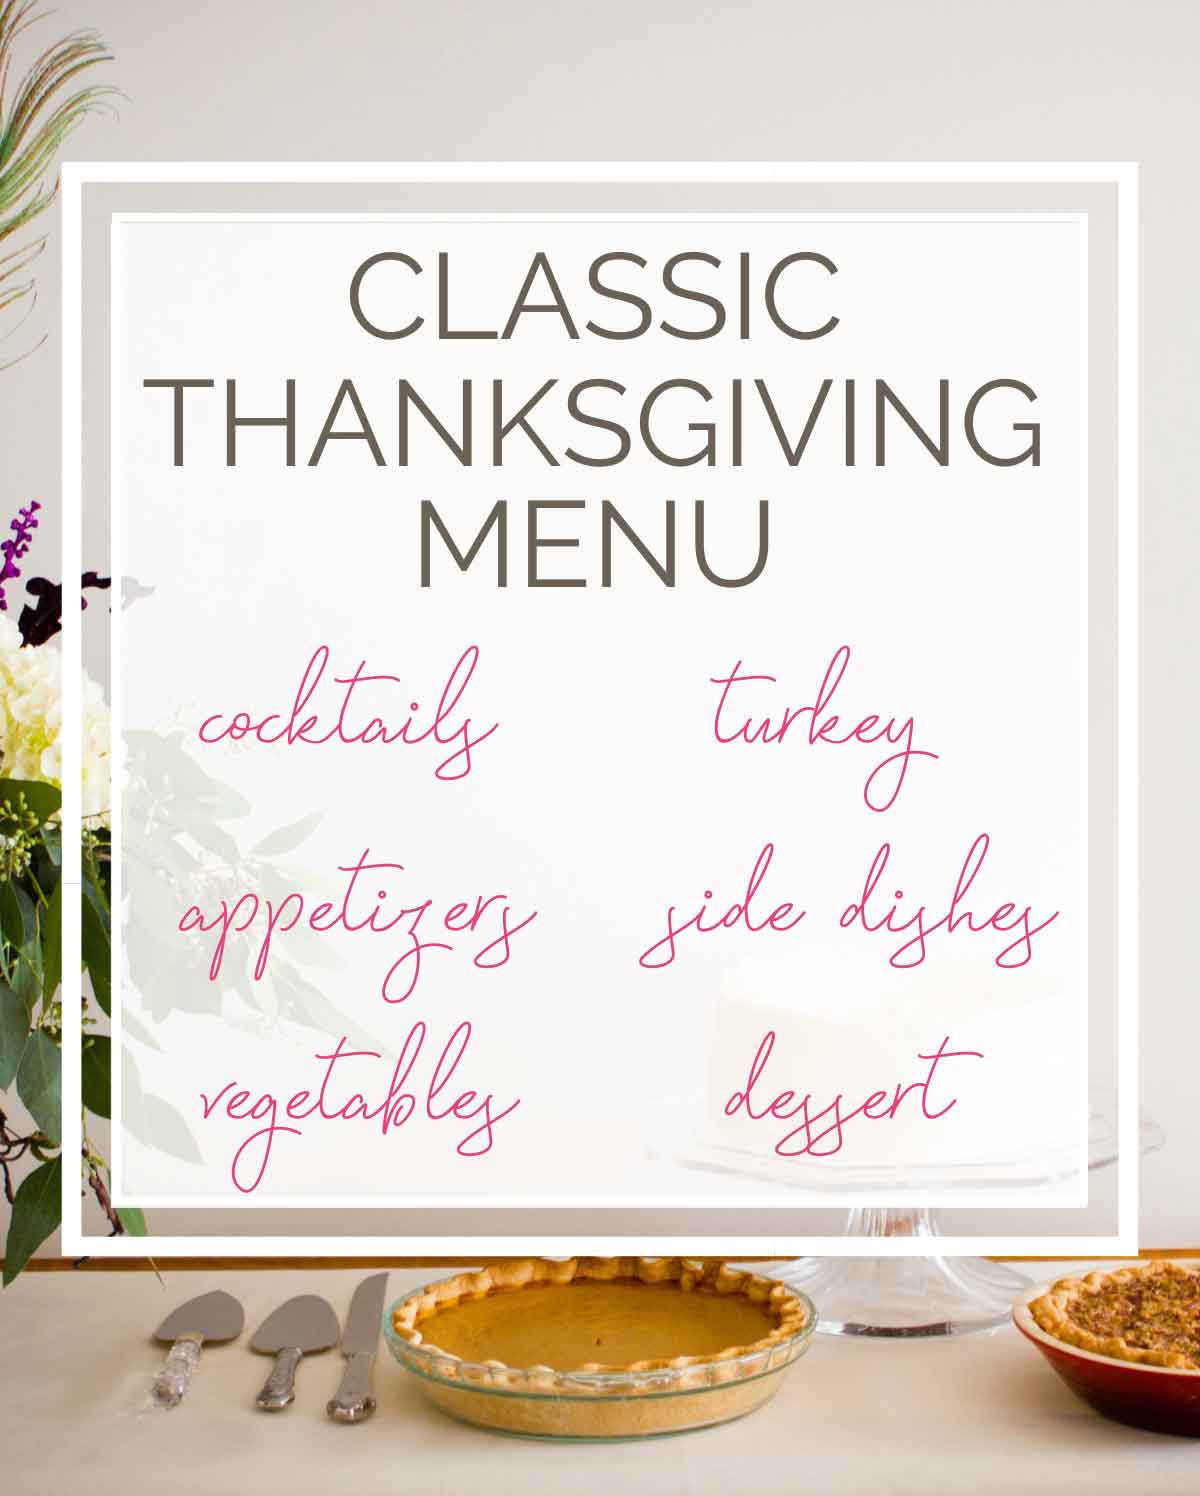 Background photo of dessert table with text overlay of Classic Thanksgiving Menu and the words cocktails, appetizers, vegetables, turkey, side dishes, and dessert.